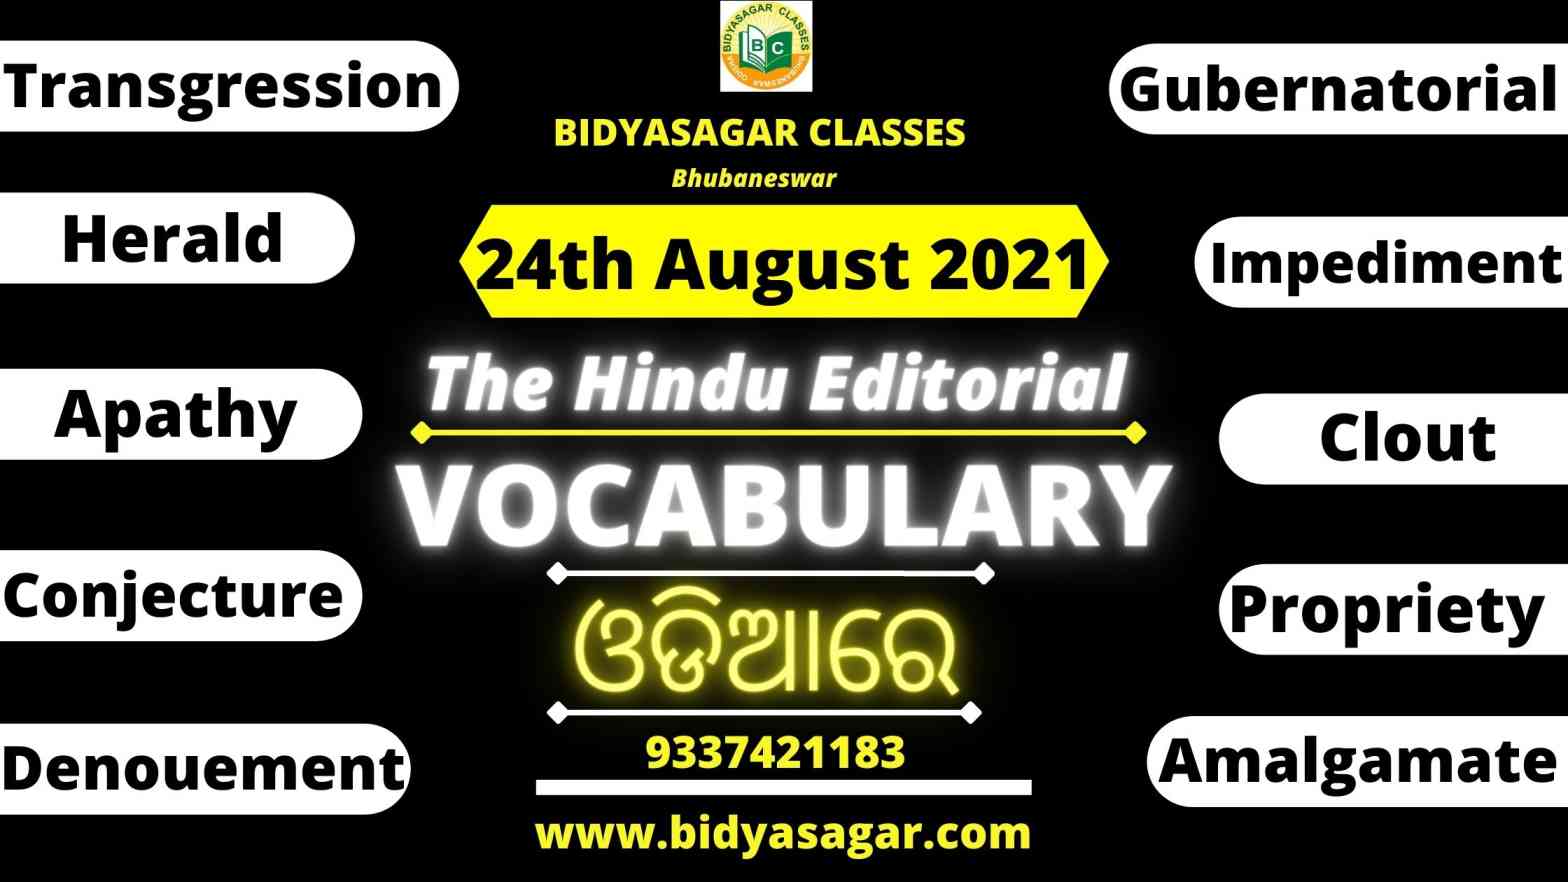 The Hindu Editorial Vocabulary of 24th August 2021